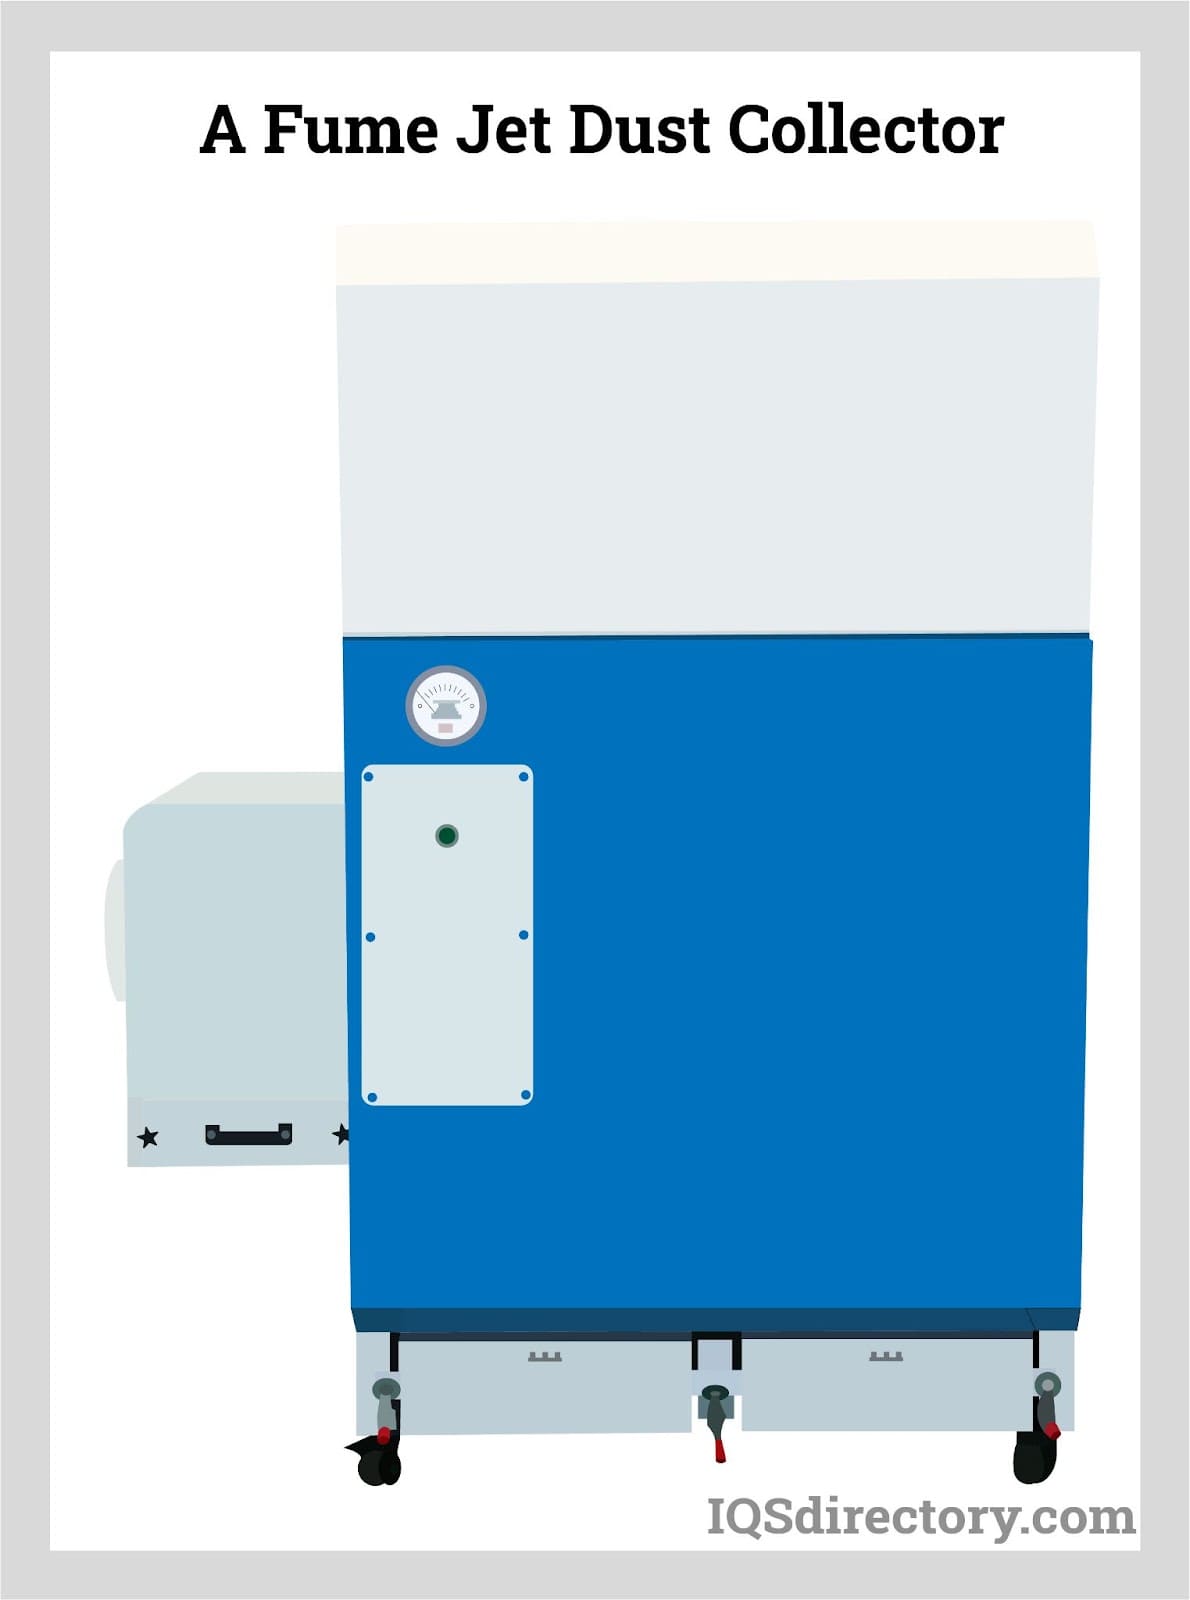 A Fume Jet Dust Collector